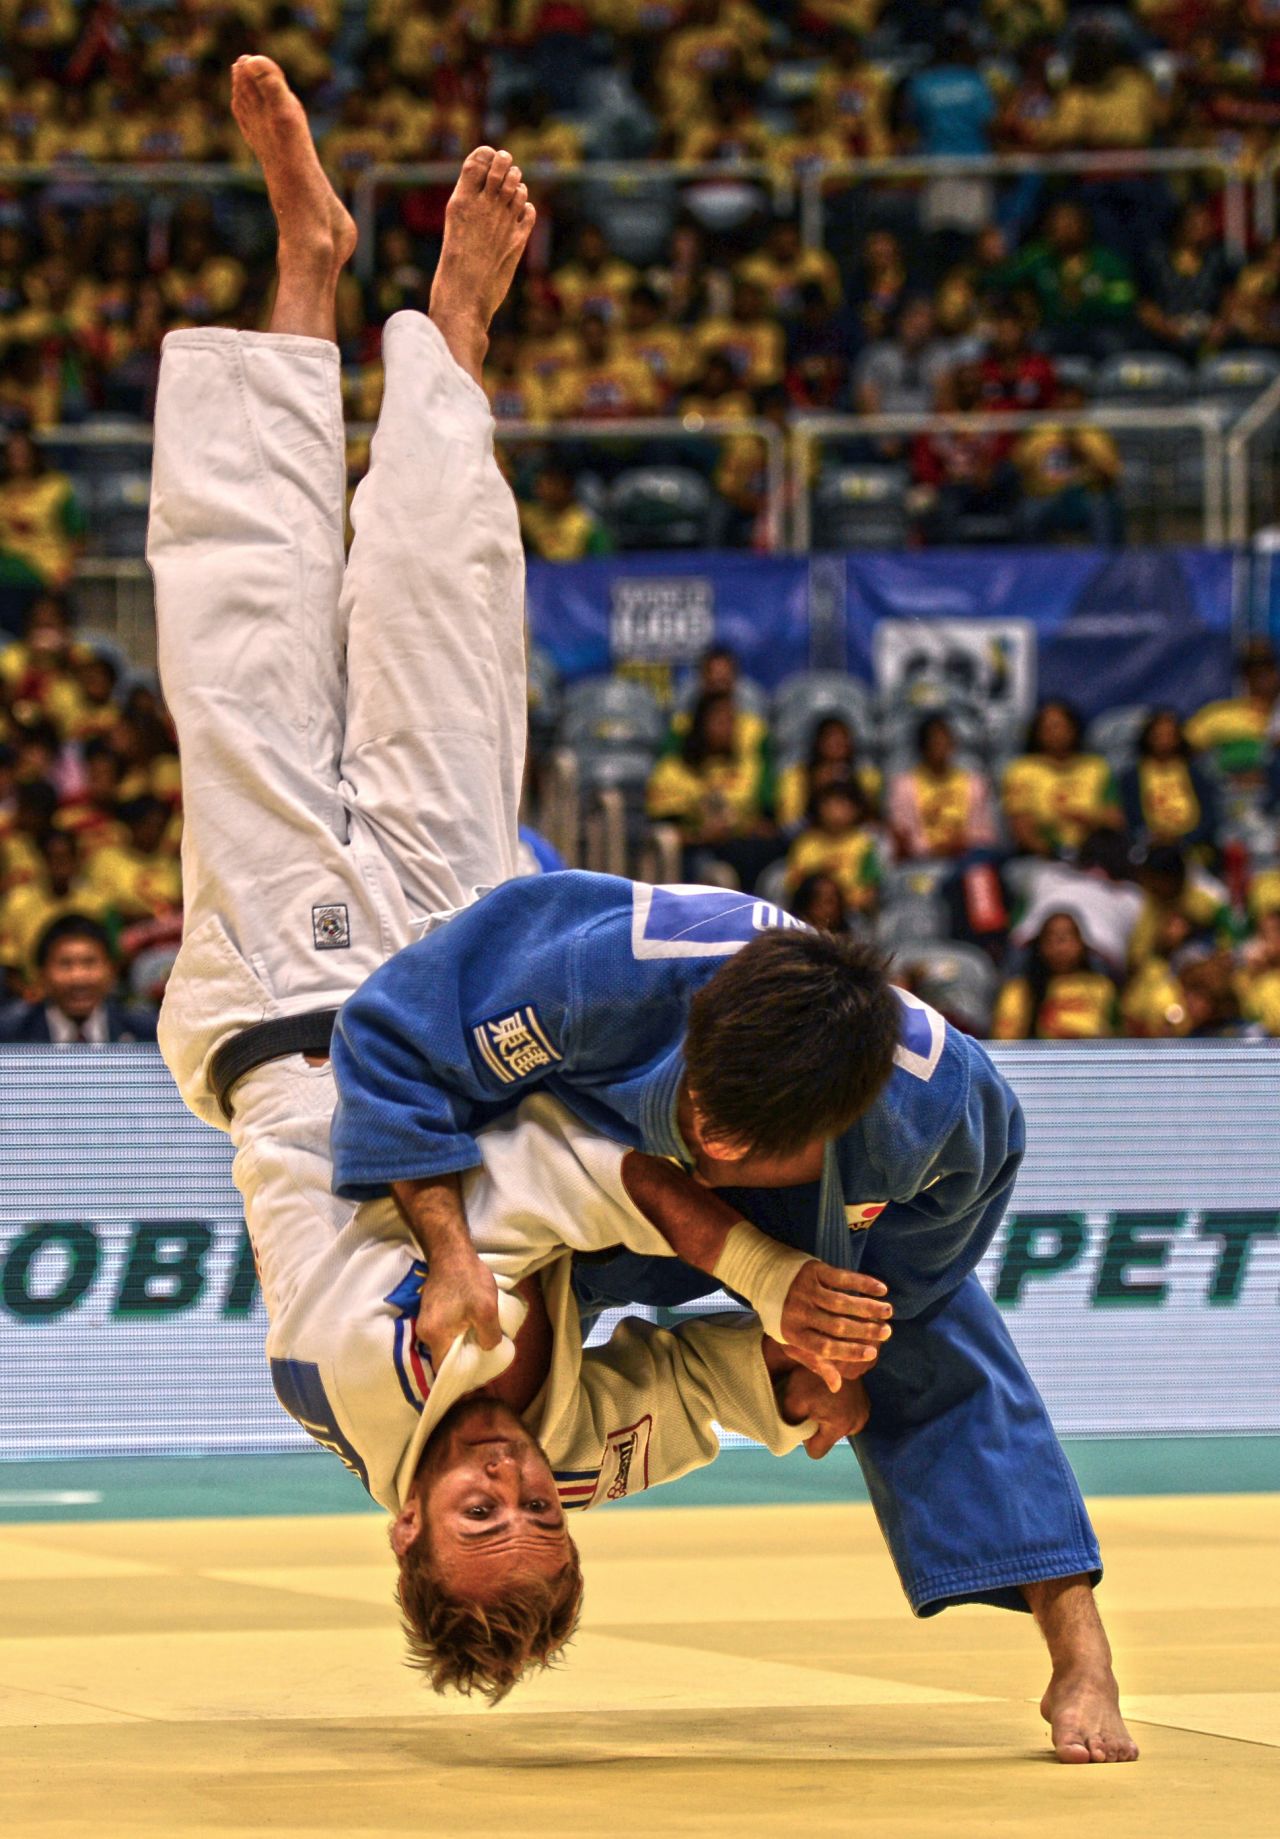 Shohei Ono is now an Olympic and double world champion at -73kg. But in 2013, he had none of those titles. This is him throwing France's Ugo Legrand for ippon in the 2013 World Championship final to become world champion for the first time. If I could choose only one picture to define my career, it would be this. Legrand is so perfectly vertical, which you rarely see in judo... let alone in a world championship final. This was the birth of a legend.